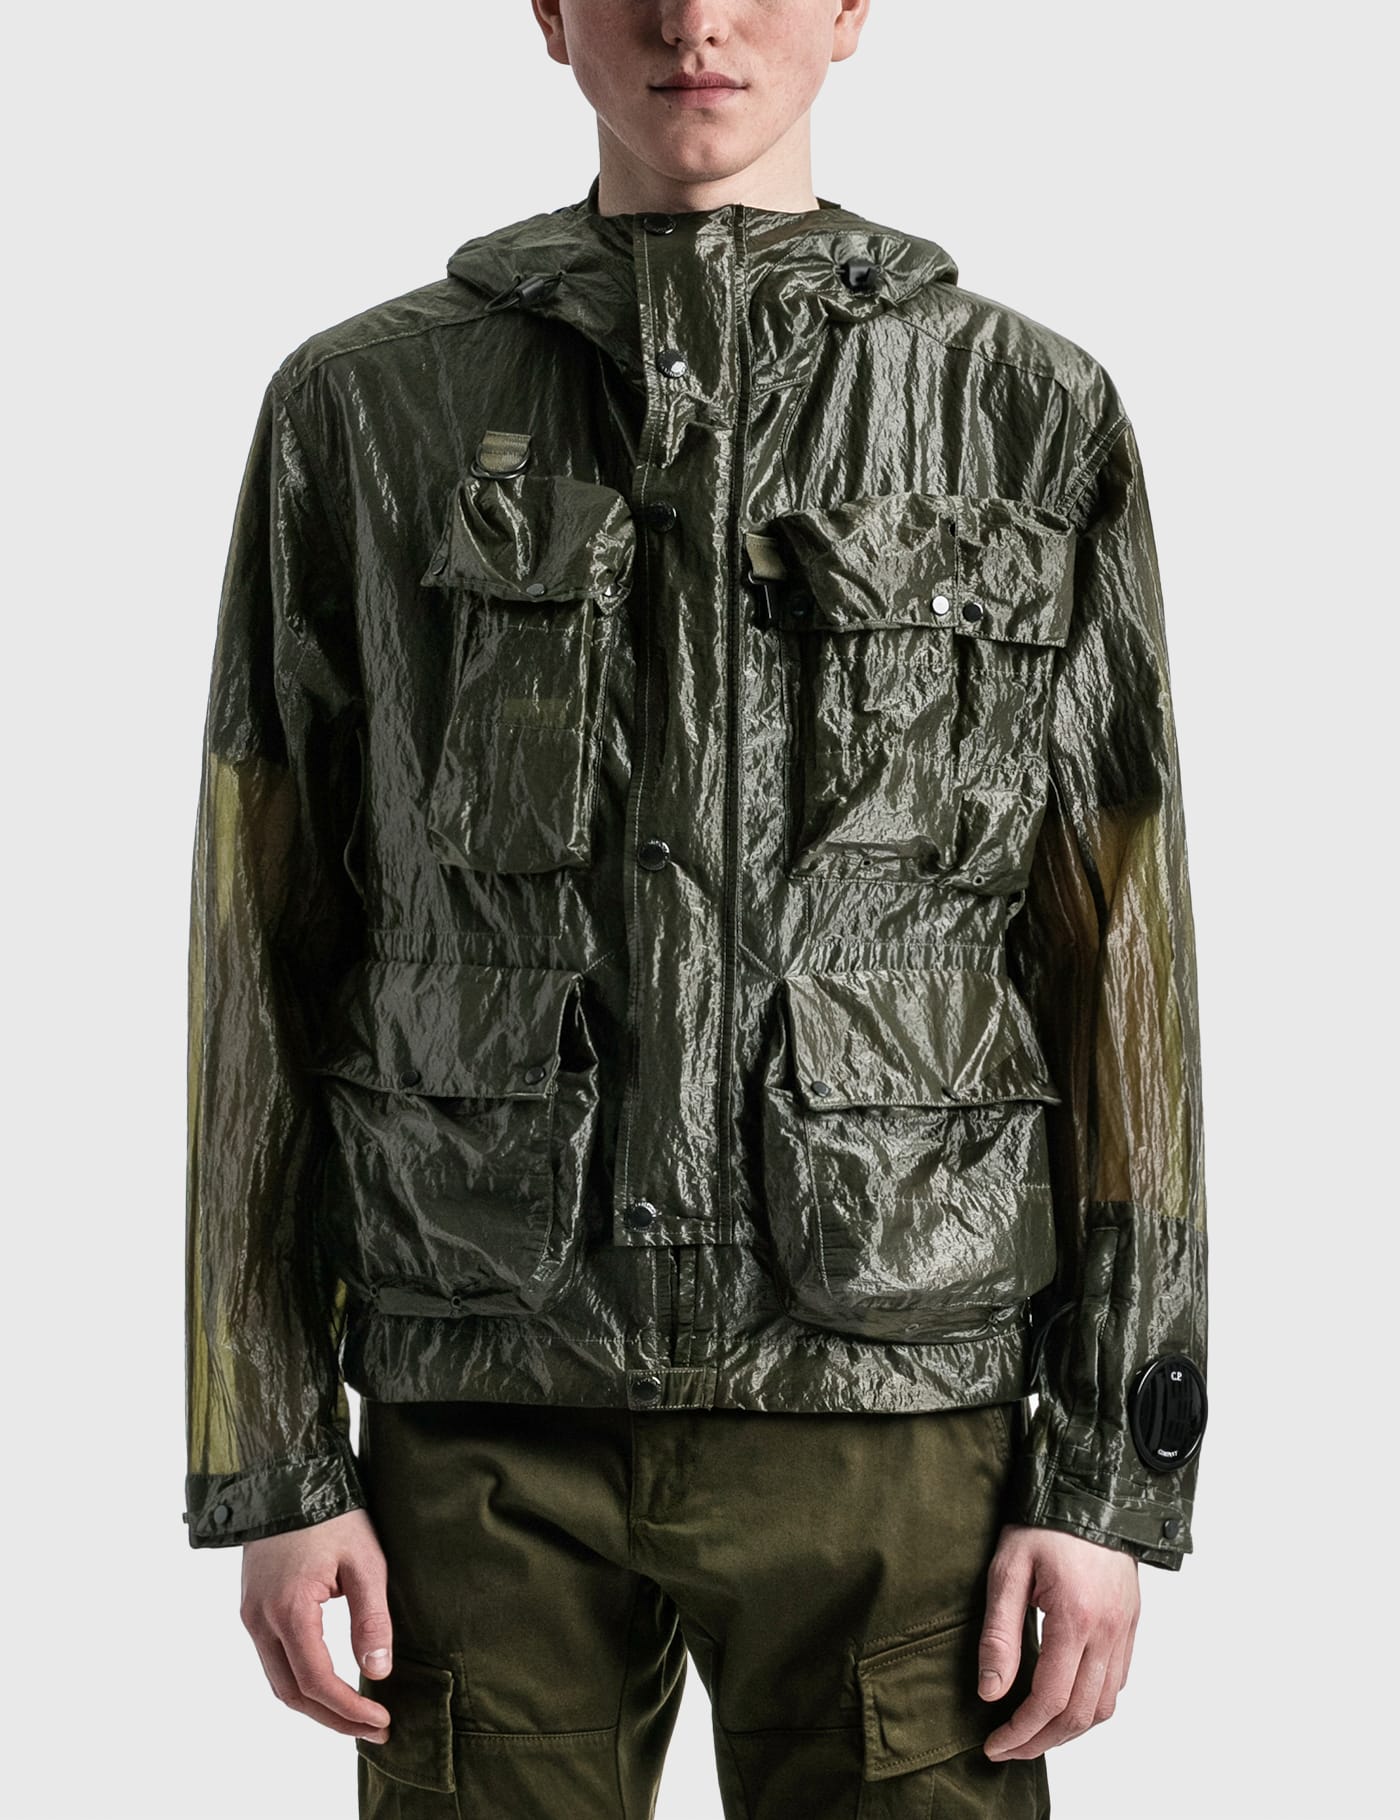 C.P. Company - Kan-d La Mille Jacket | HBX - Globally Curated 